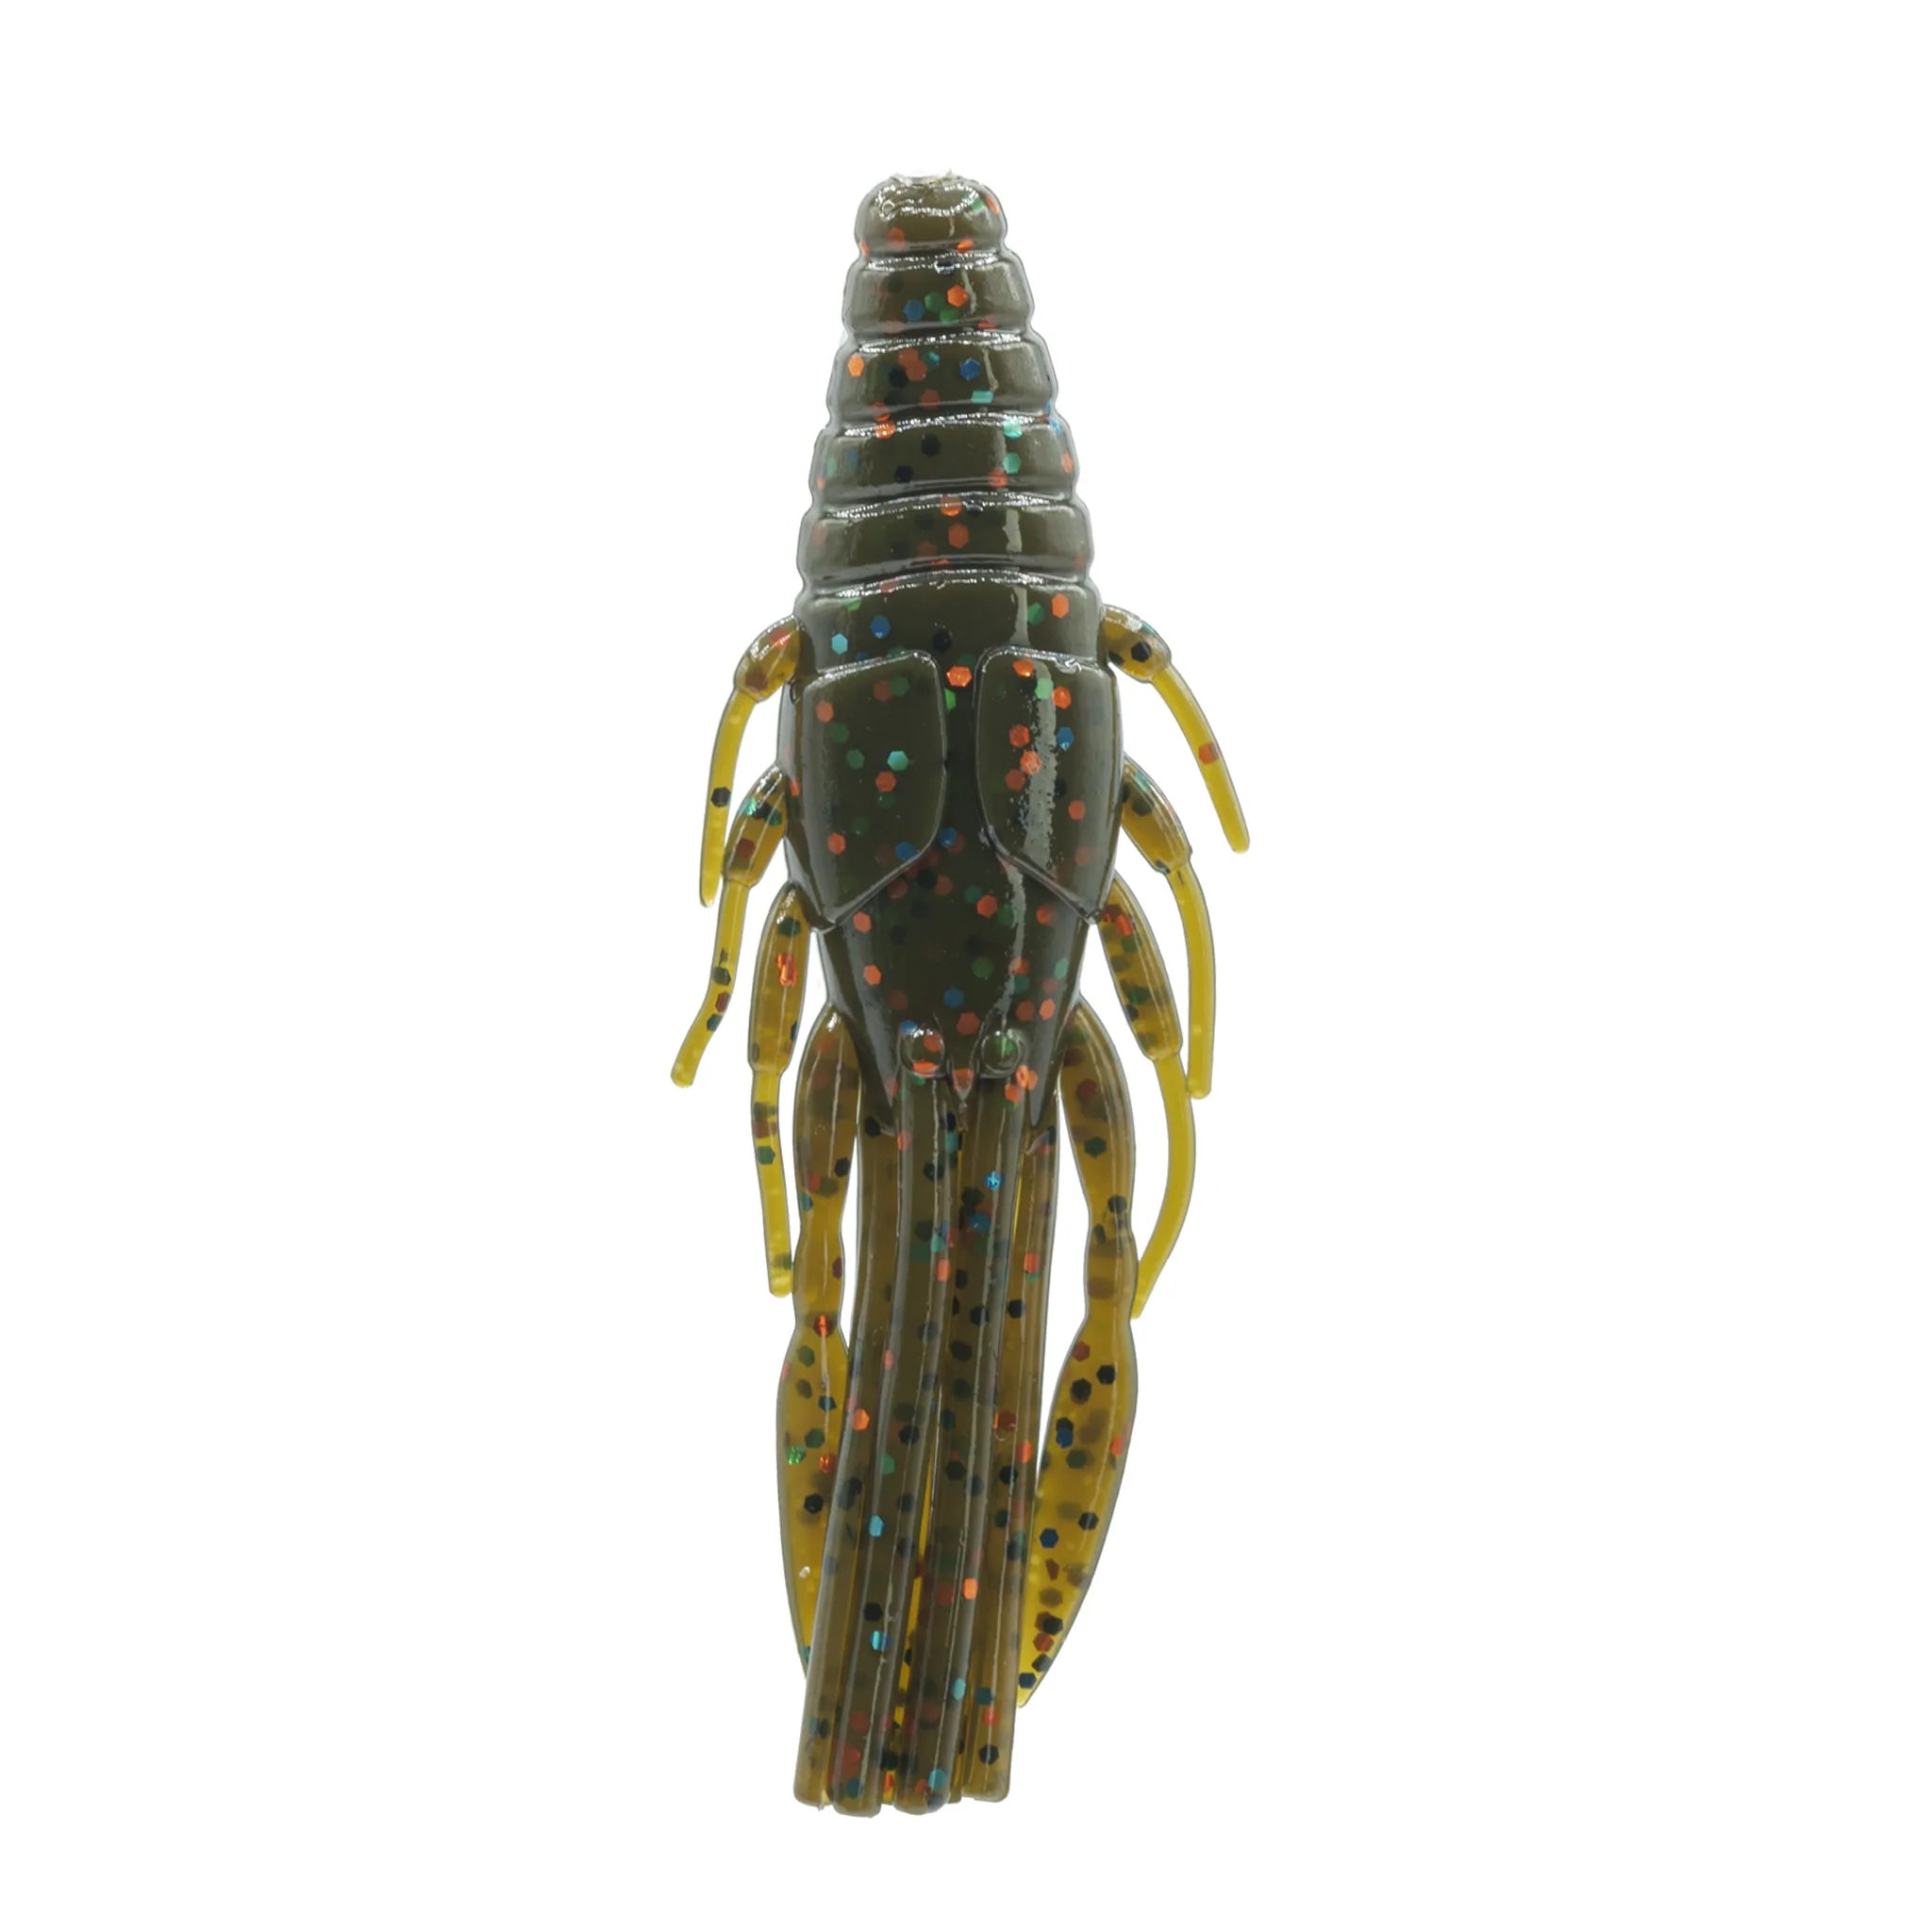 NIKKO CRAW 3.2  Copperstate Tackle